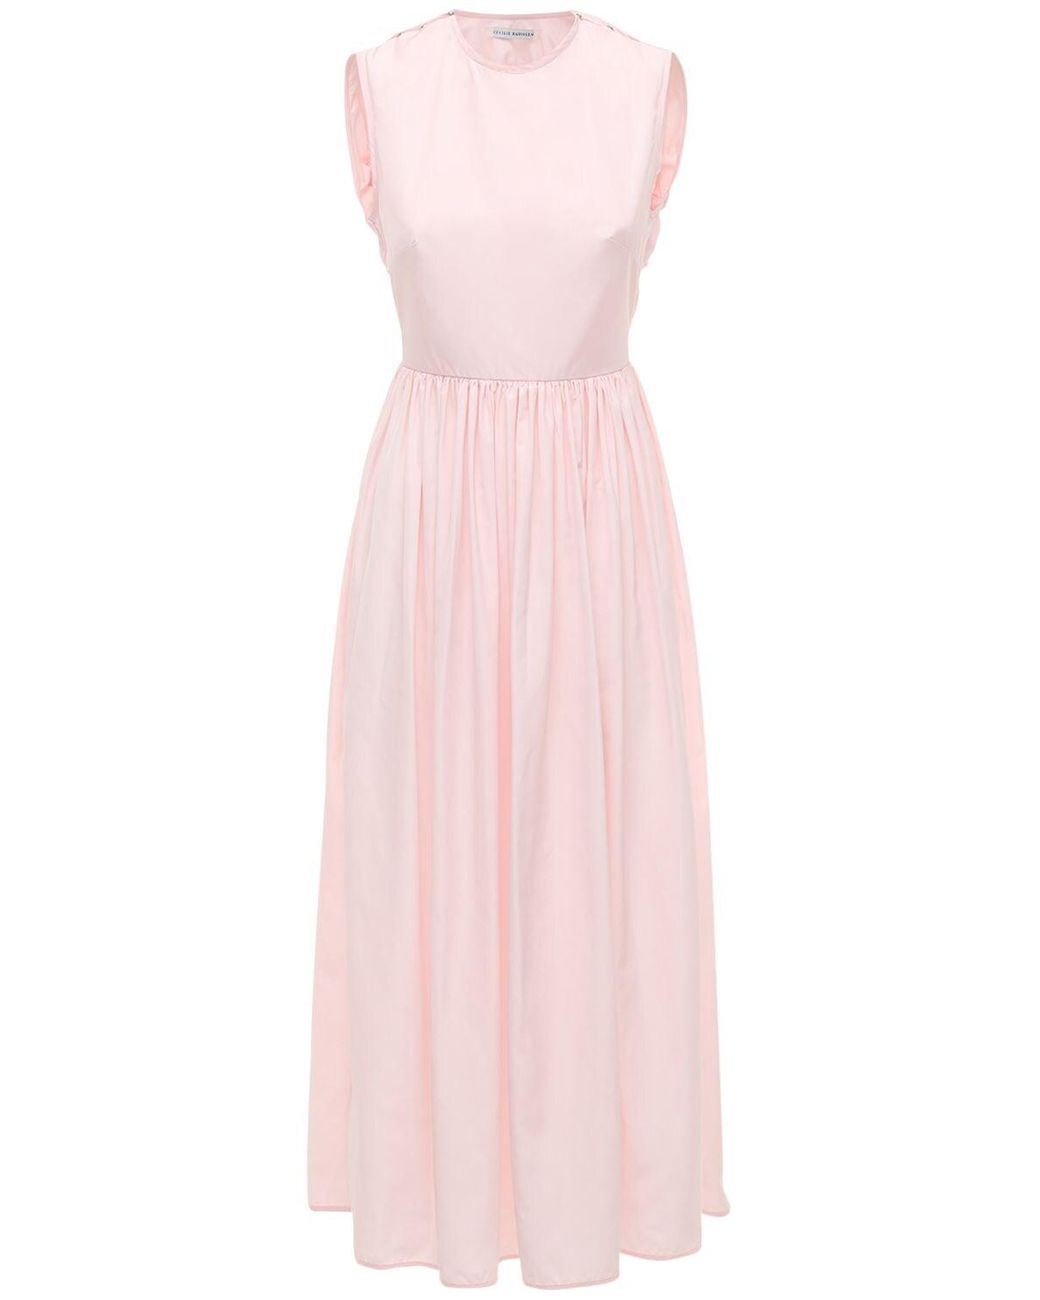 Cecilie Bahnsen Hannie Recycled Faille Midi Dress in Pink | Lyst